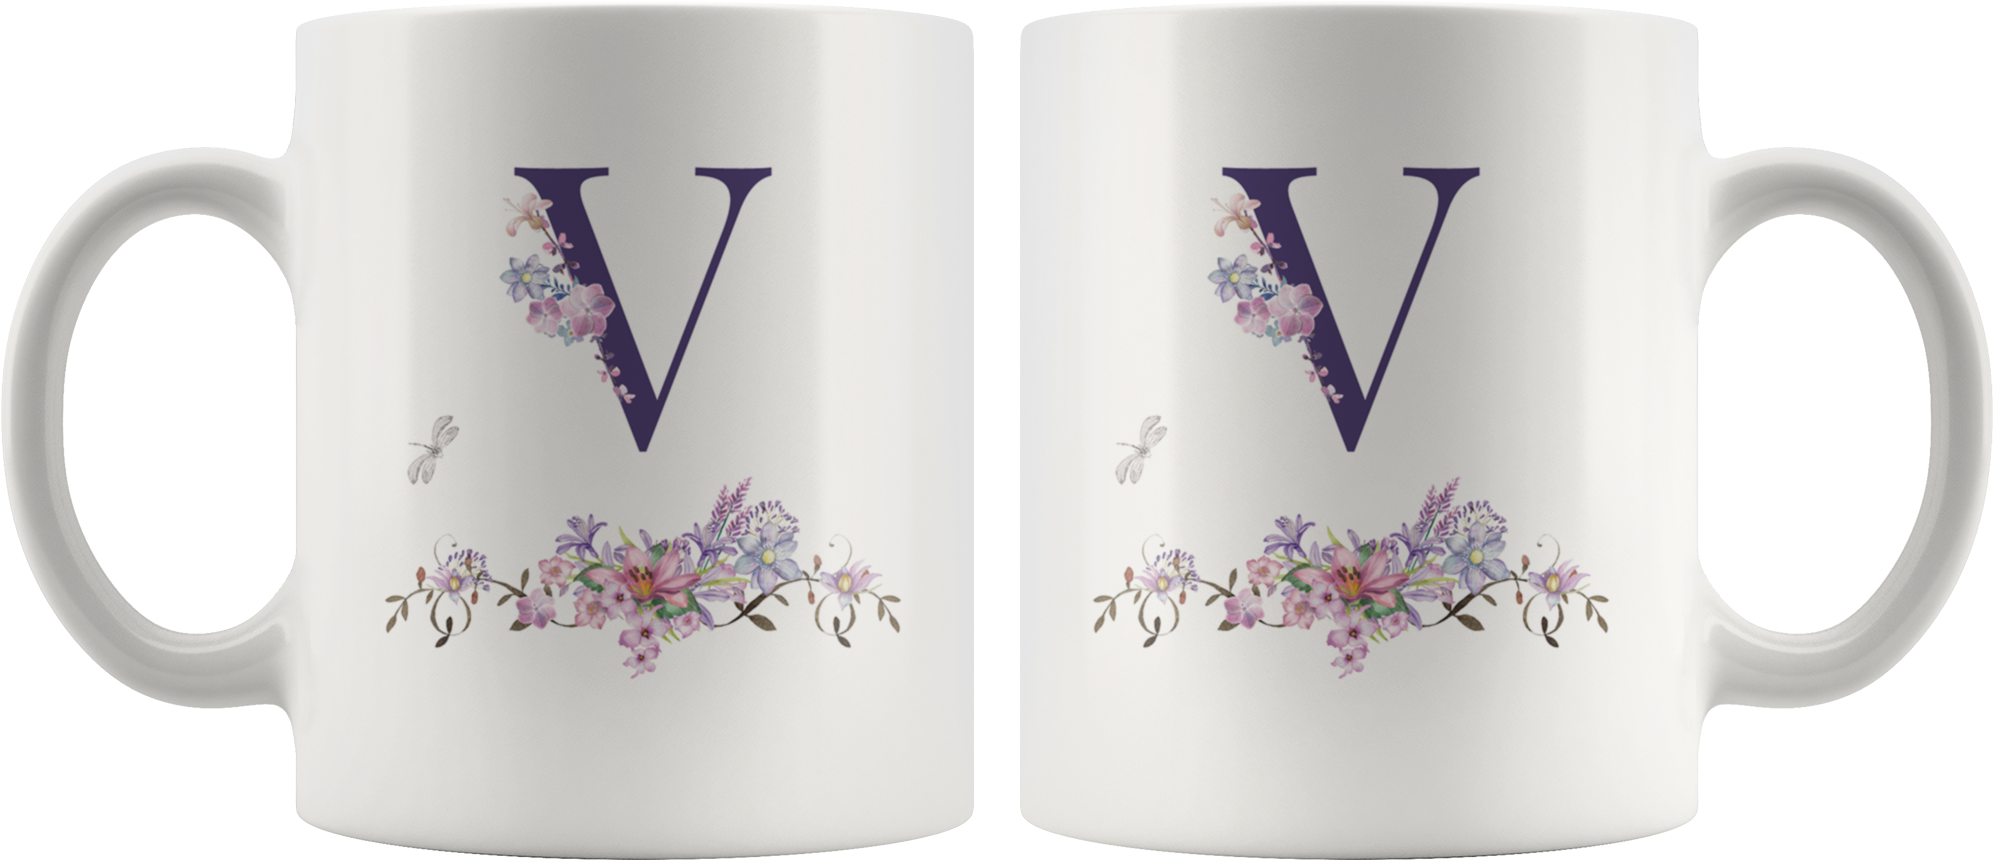 A Couple Of White Mugs With Purple Flowers